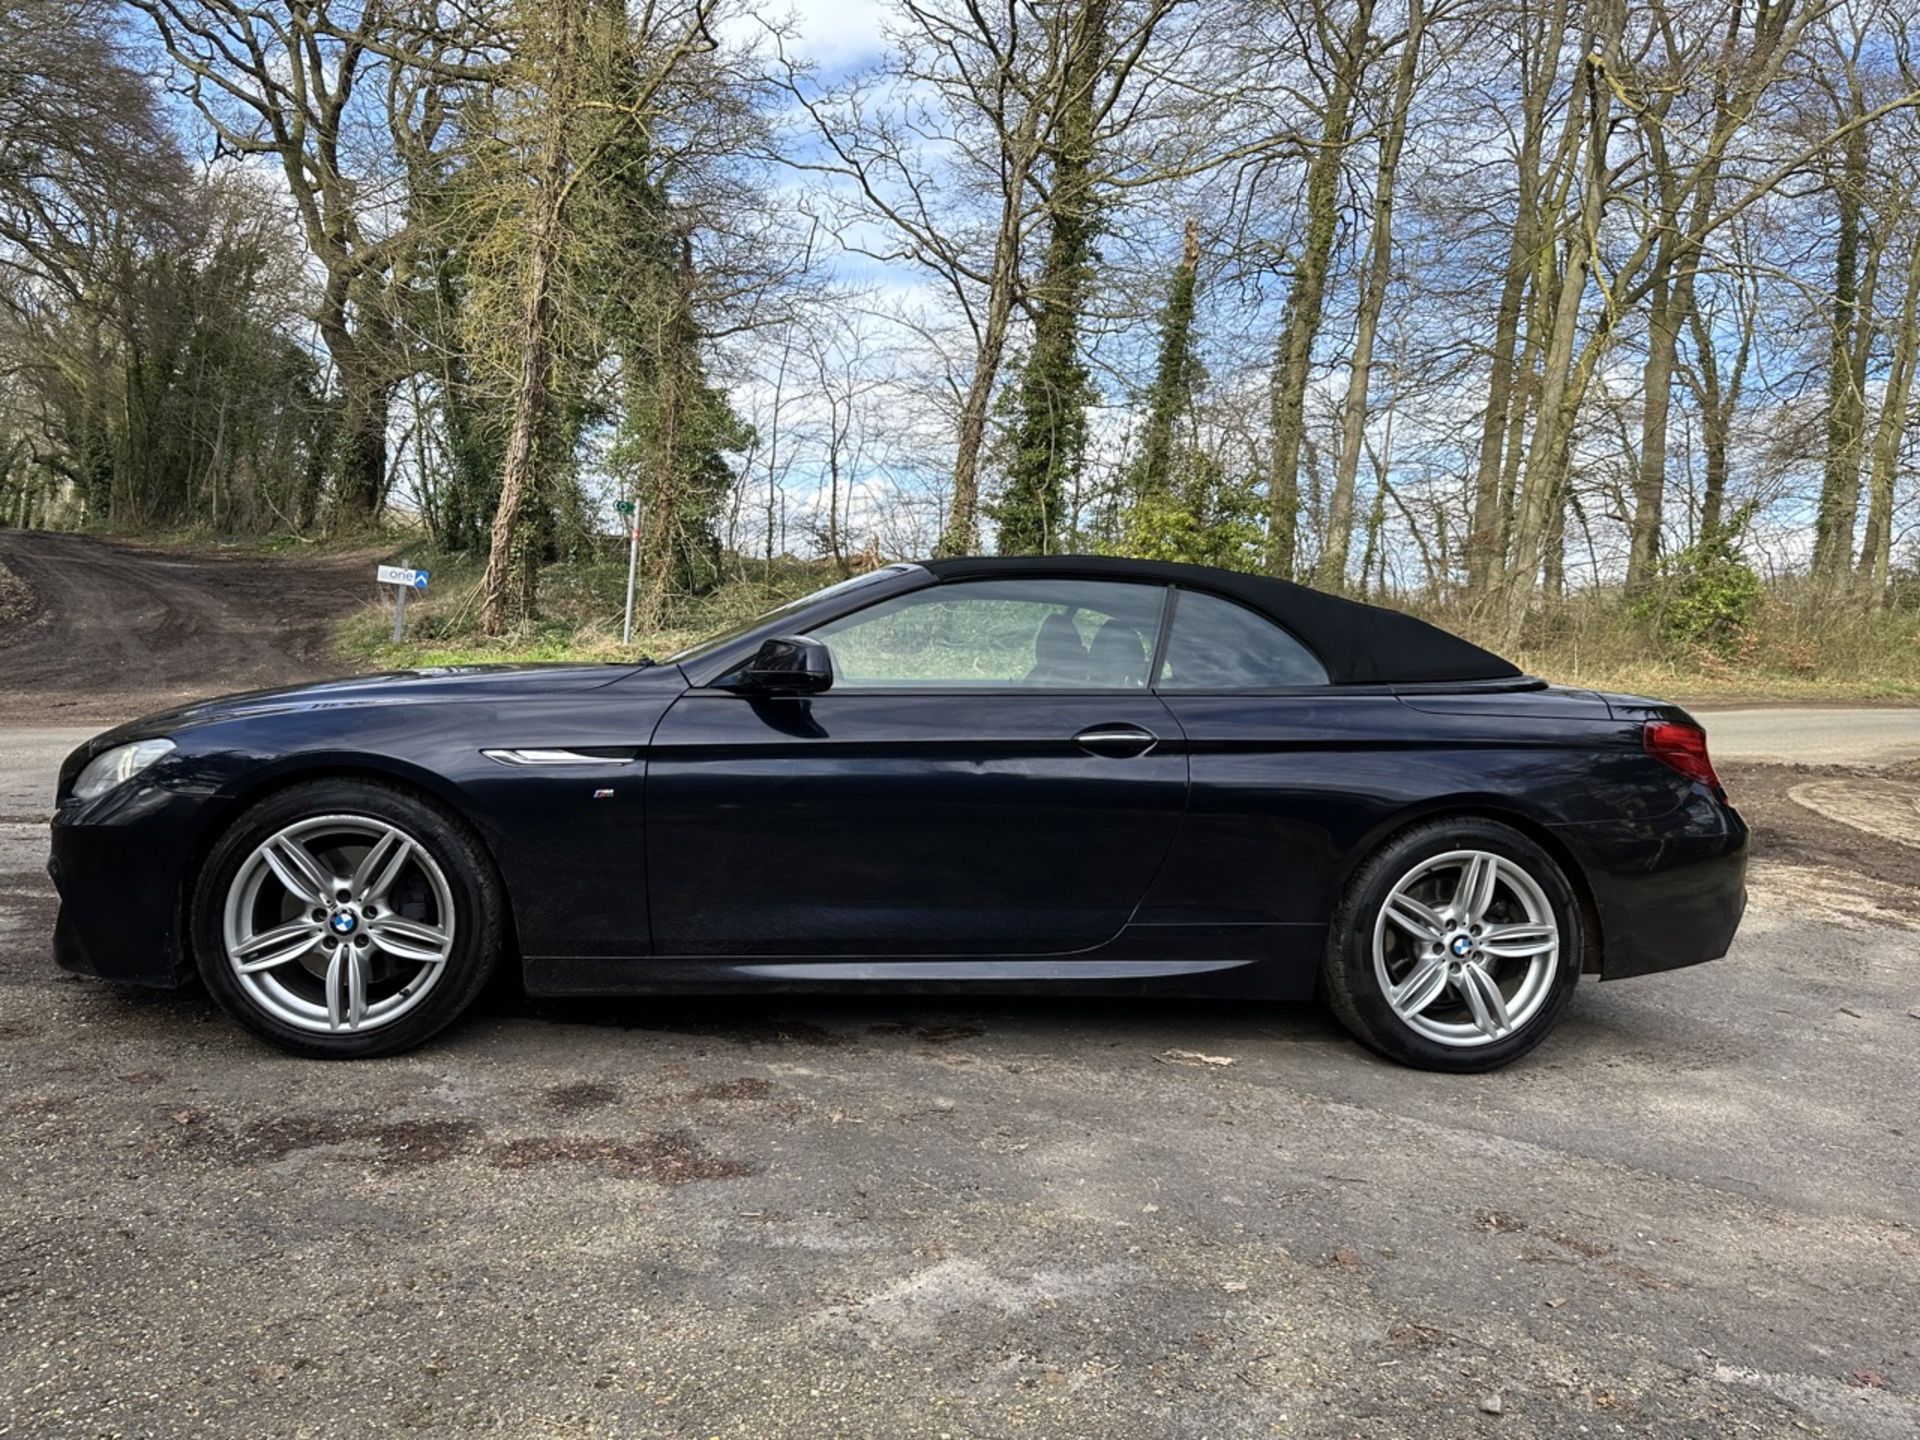 (RESERVE MET) BMW 6 SERIES 640d (M SPORT) Ultimate Summer Car - AUTOMATIC - Convertible - 2014 - Image 11 of 22